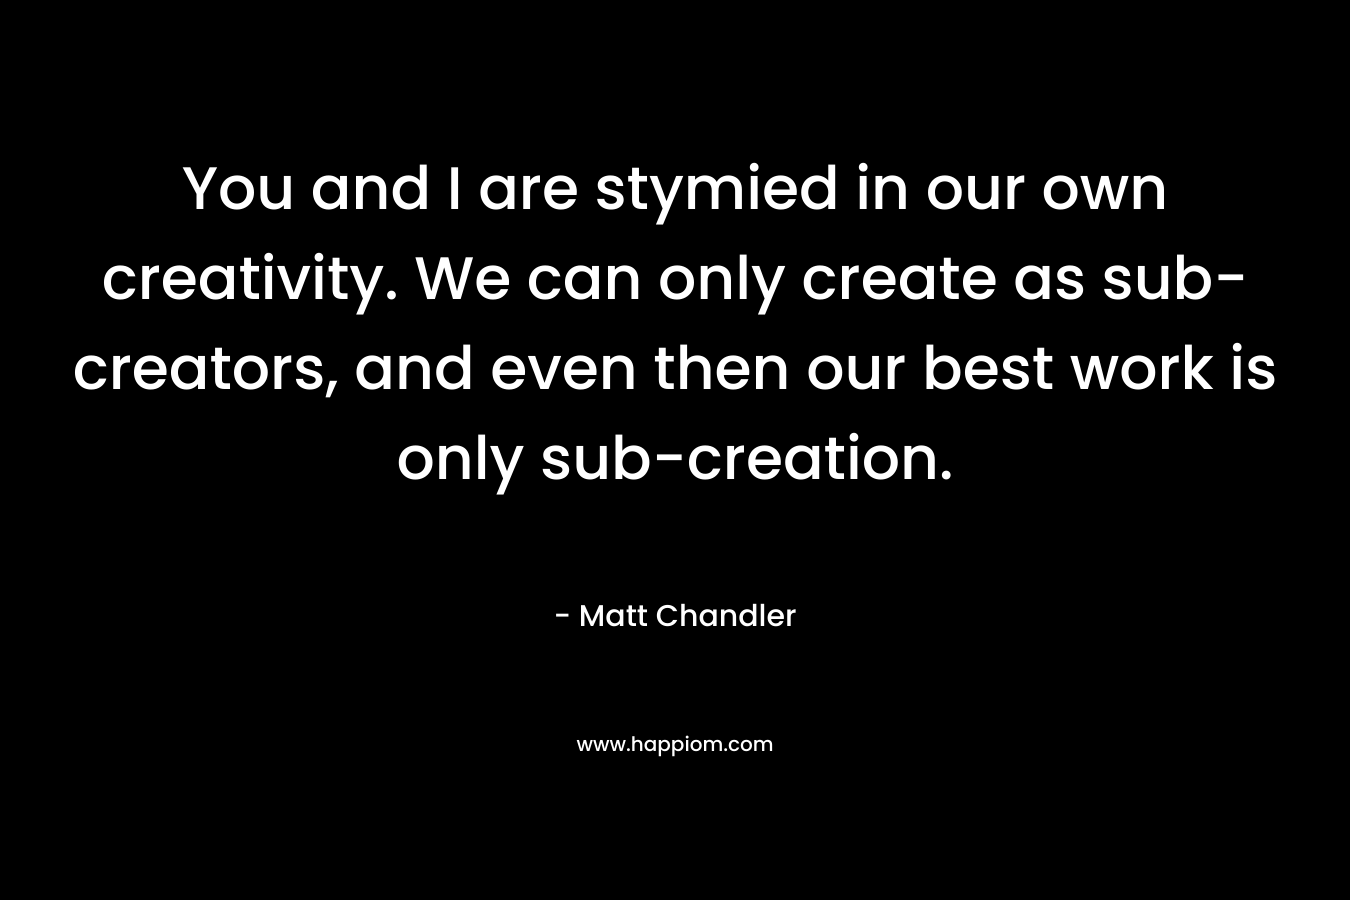 You and I are stymied in our own creativity. We can only create as sub-creators, and even then our best work is only sub-creation.